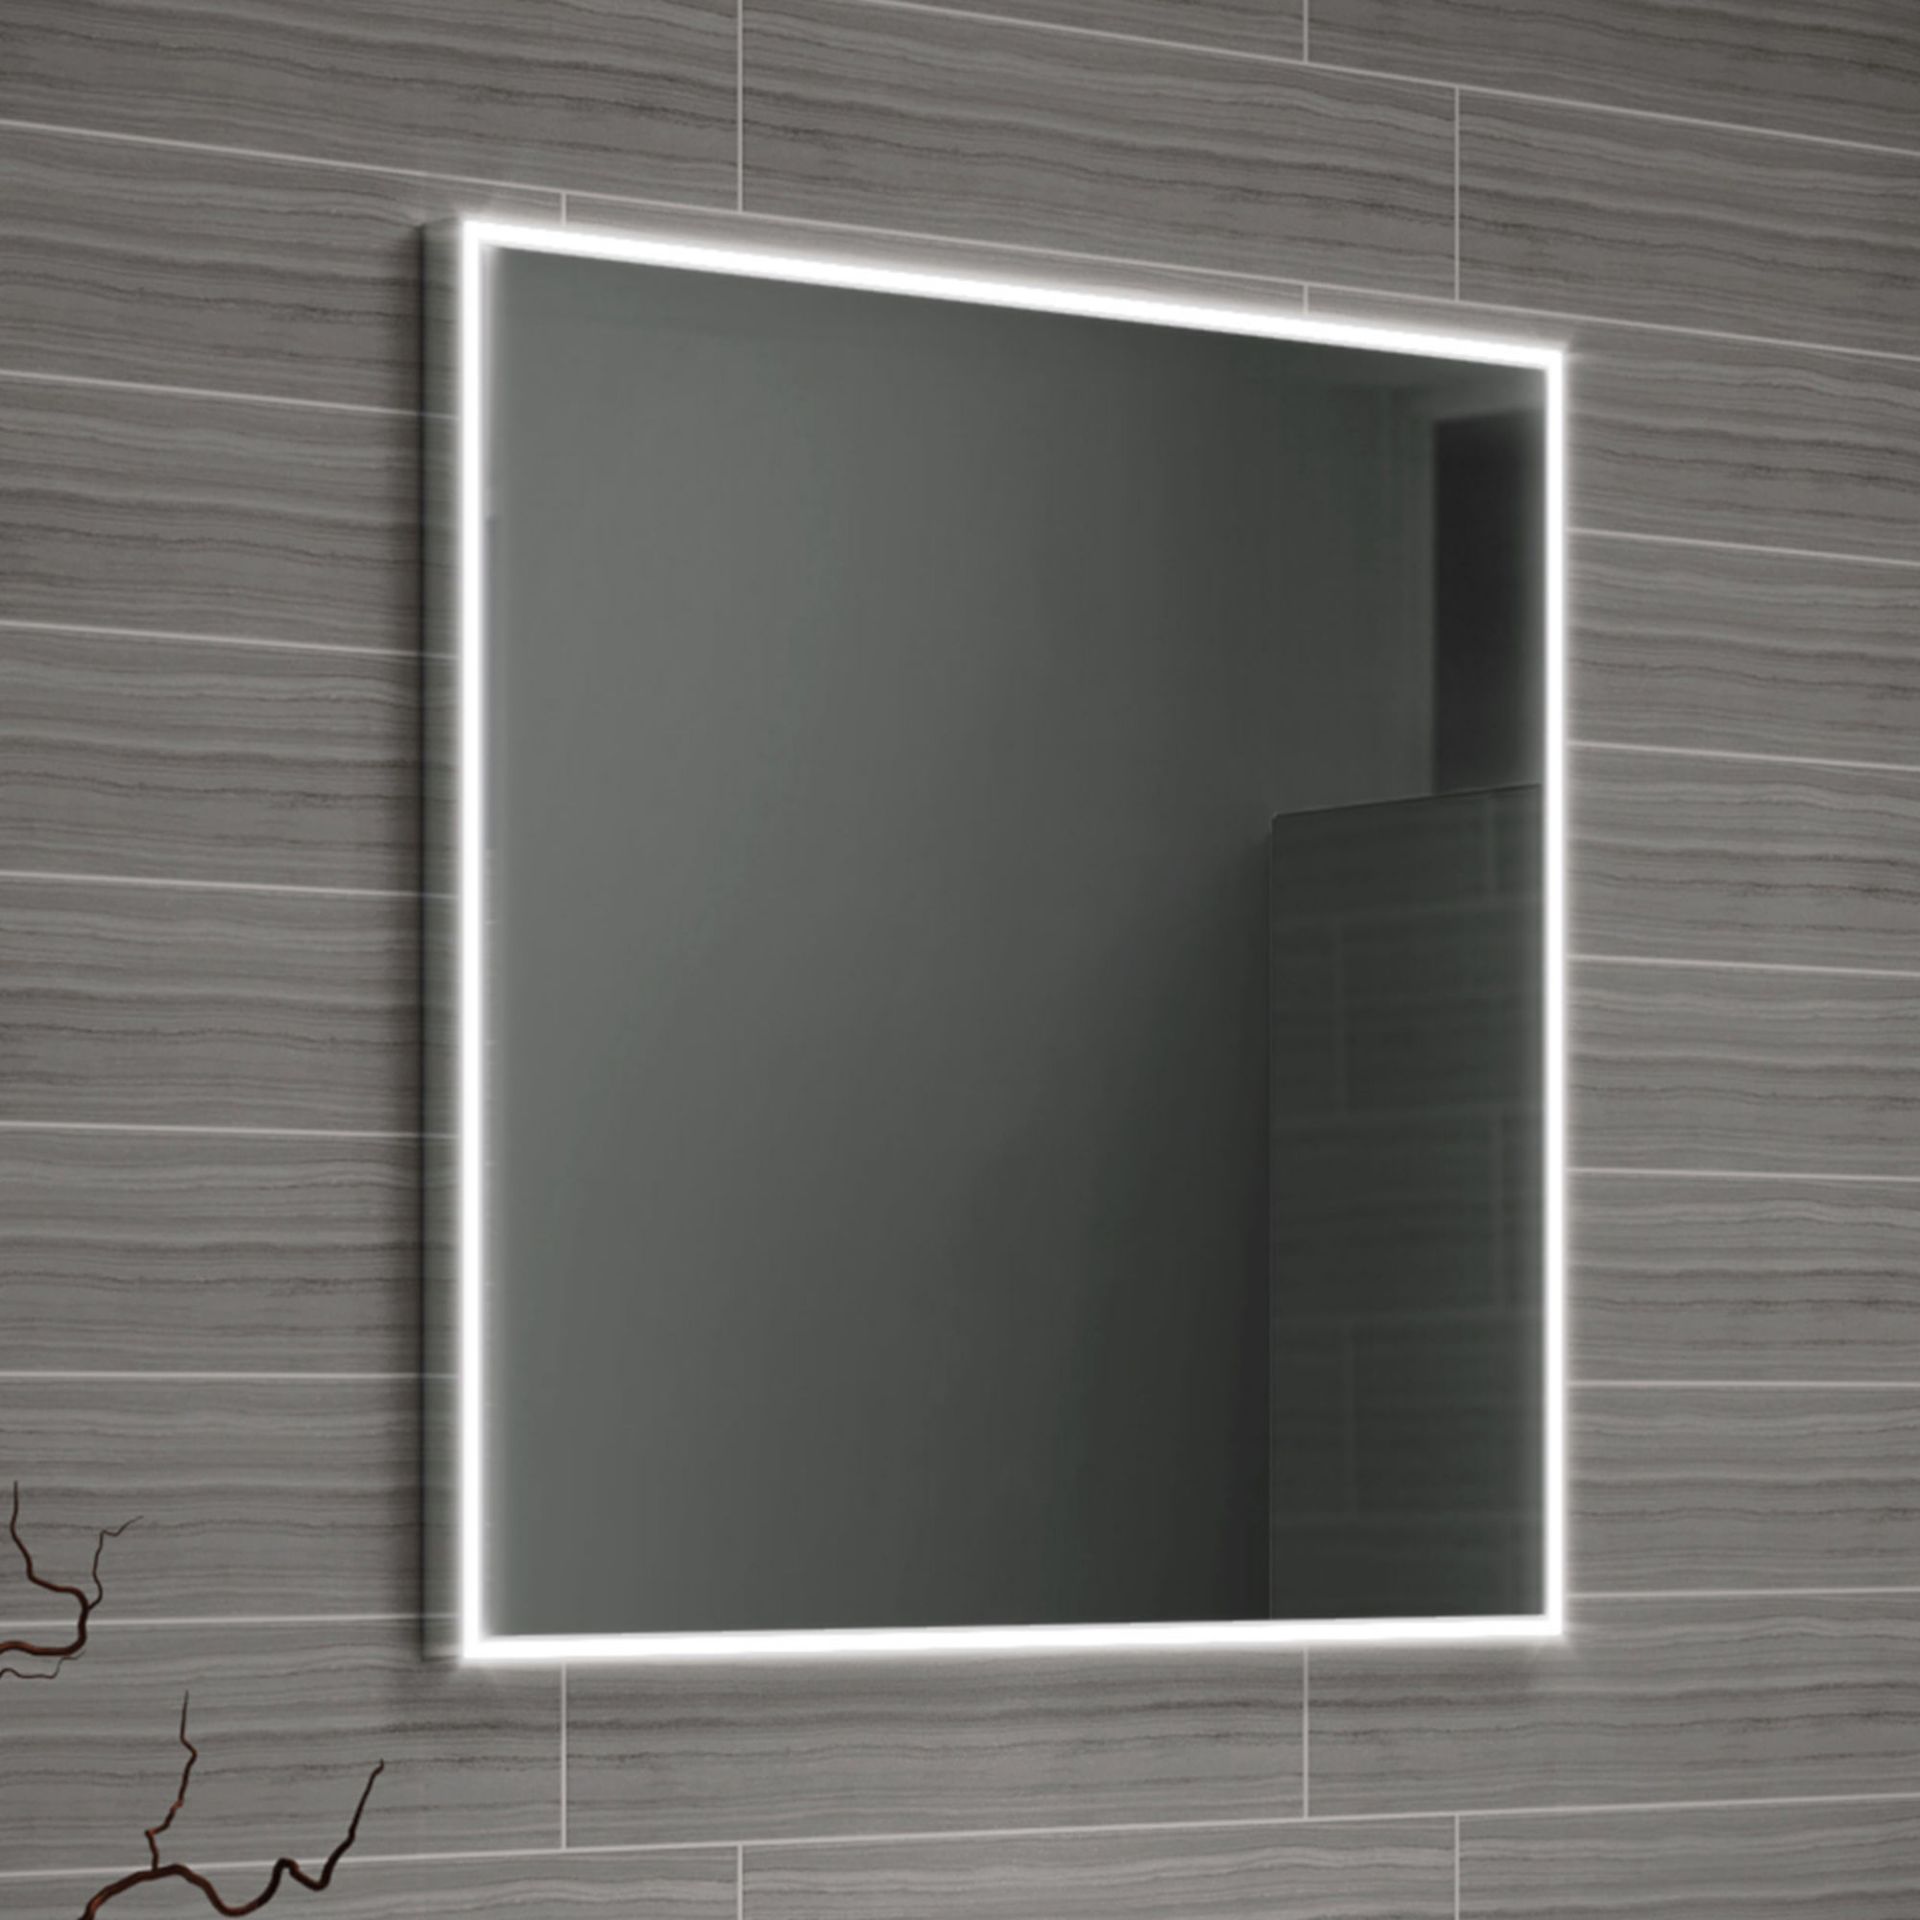 (TP53) 600x600mm Cosmic Illuminated LED Mirror. RRP £164.99. Energy efficient LED lighting with IP44